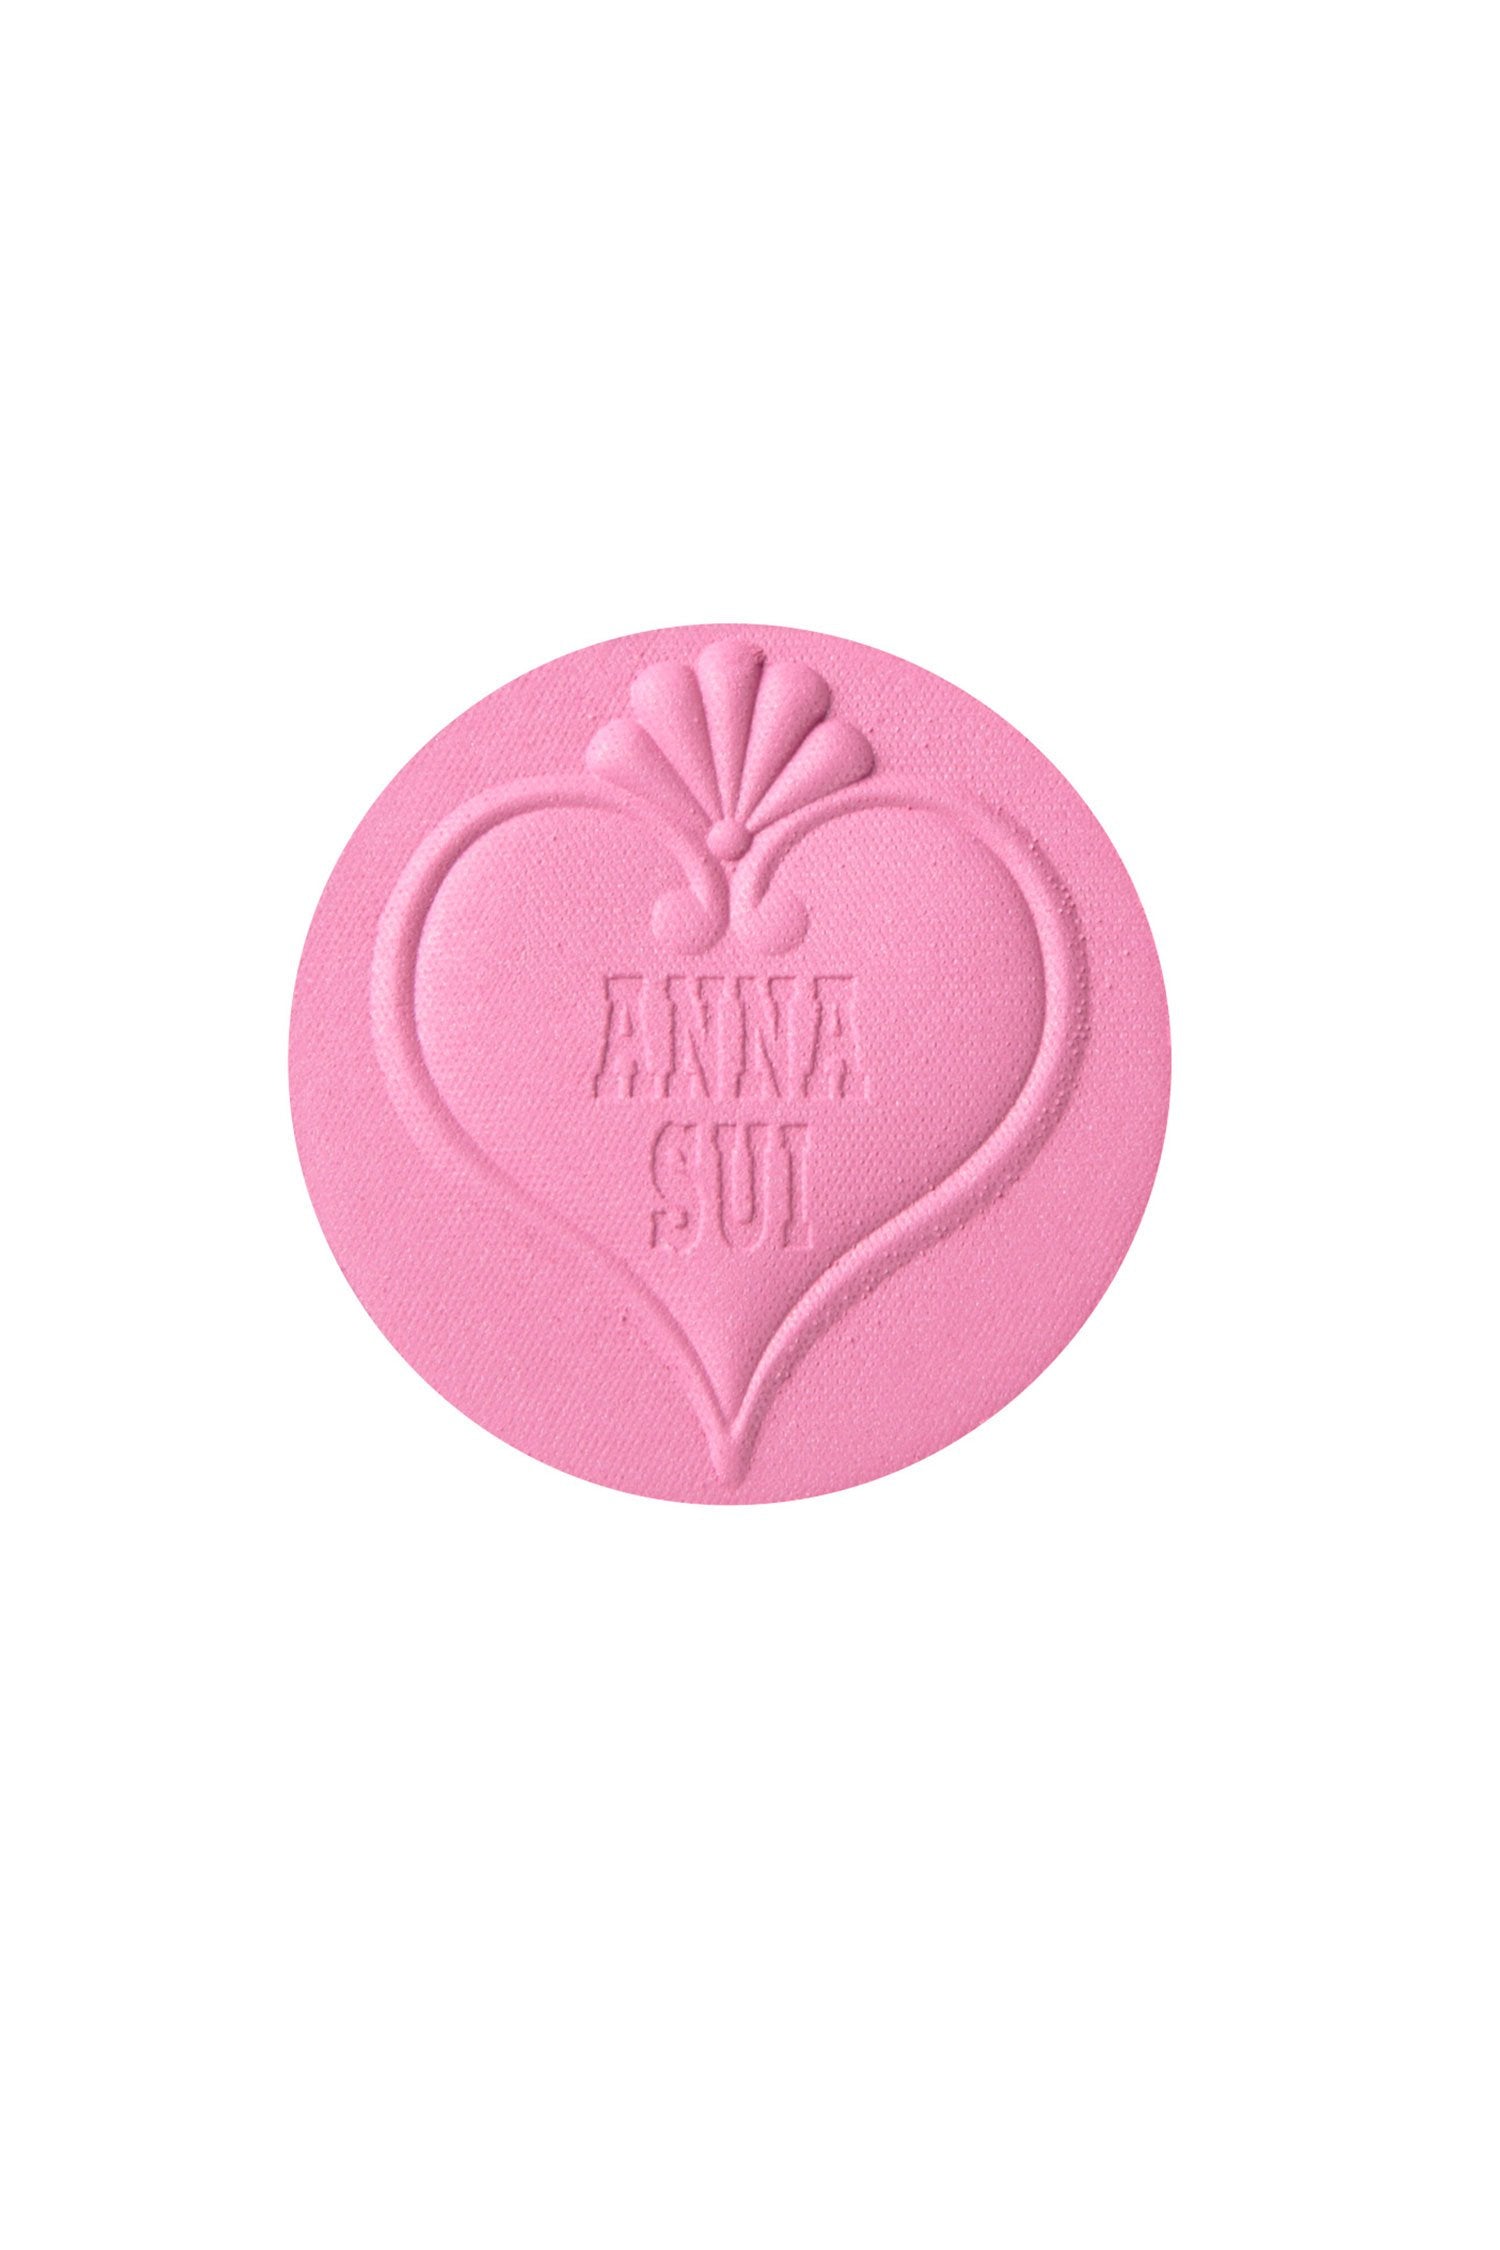 302 - Cool Pink Sui Black - Powder Blush color, round, engraved hart, seashell on top, Anna Sui branding inside